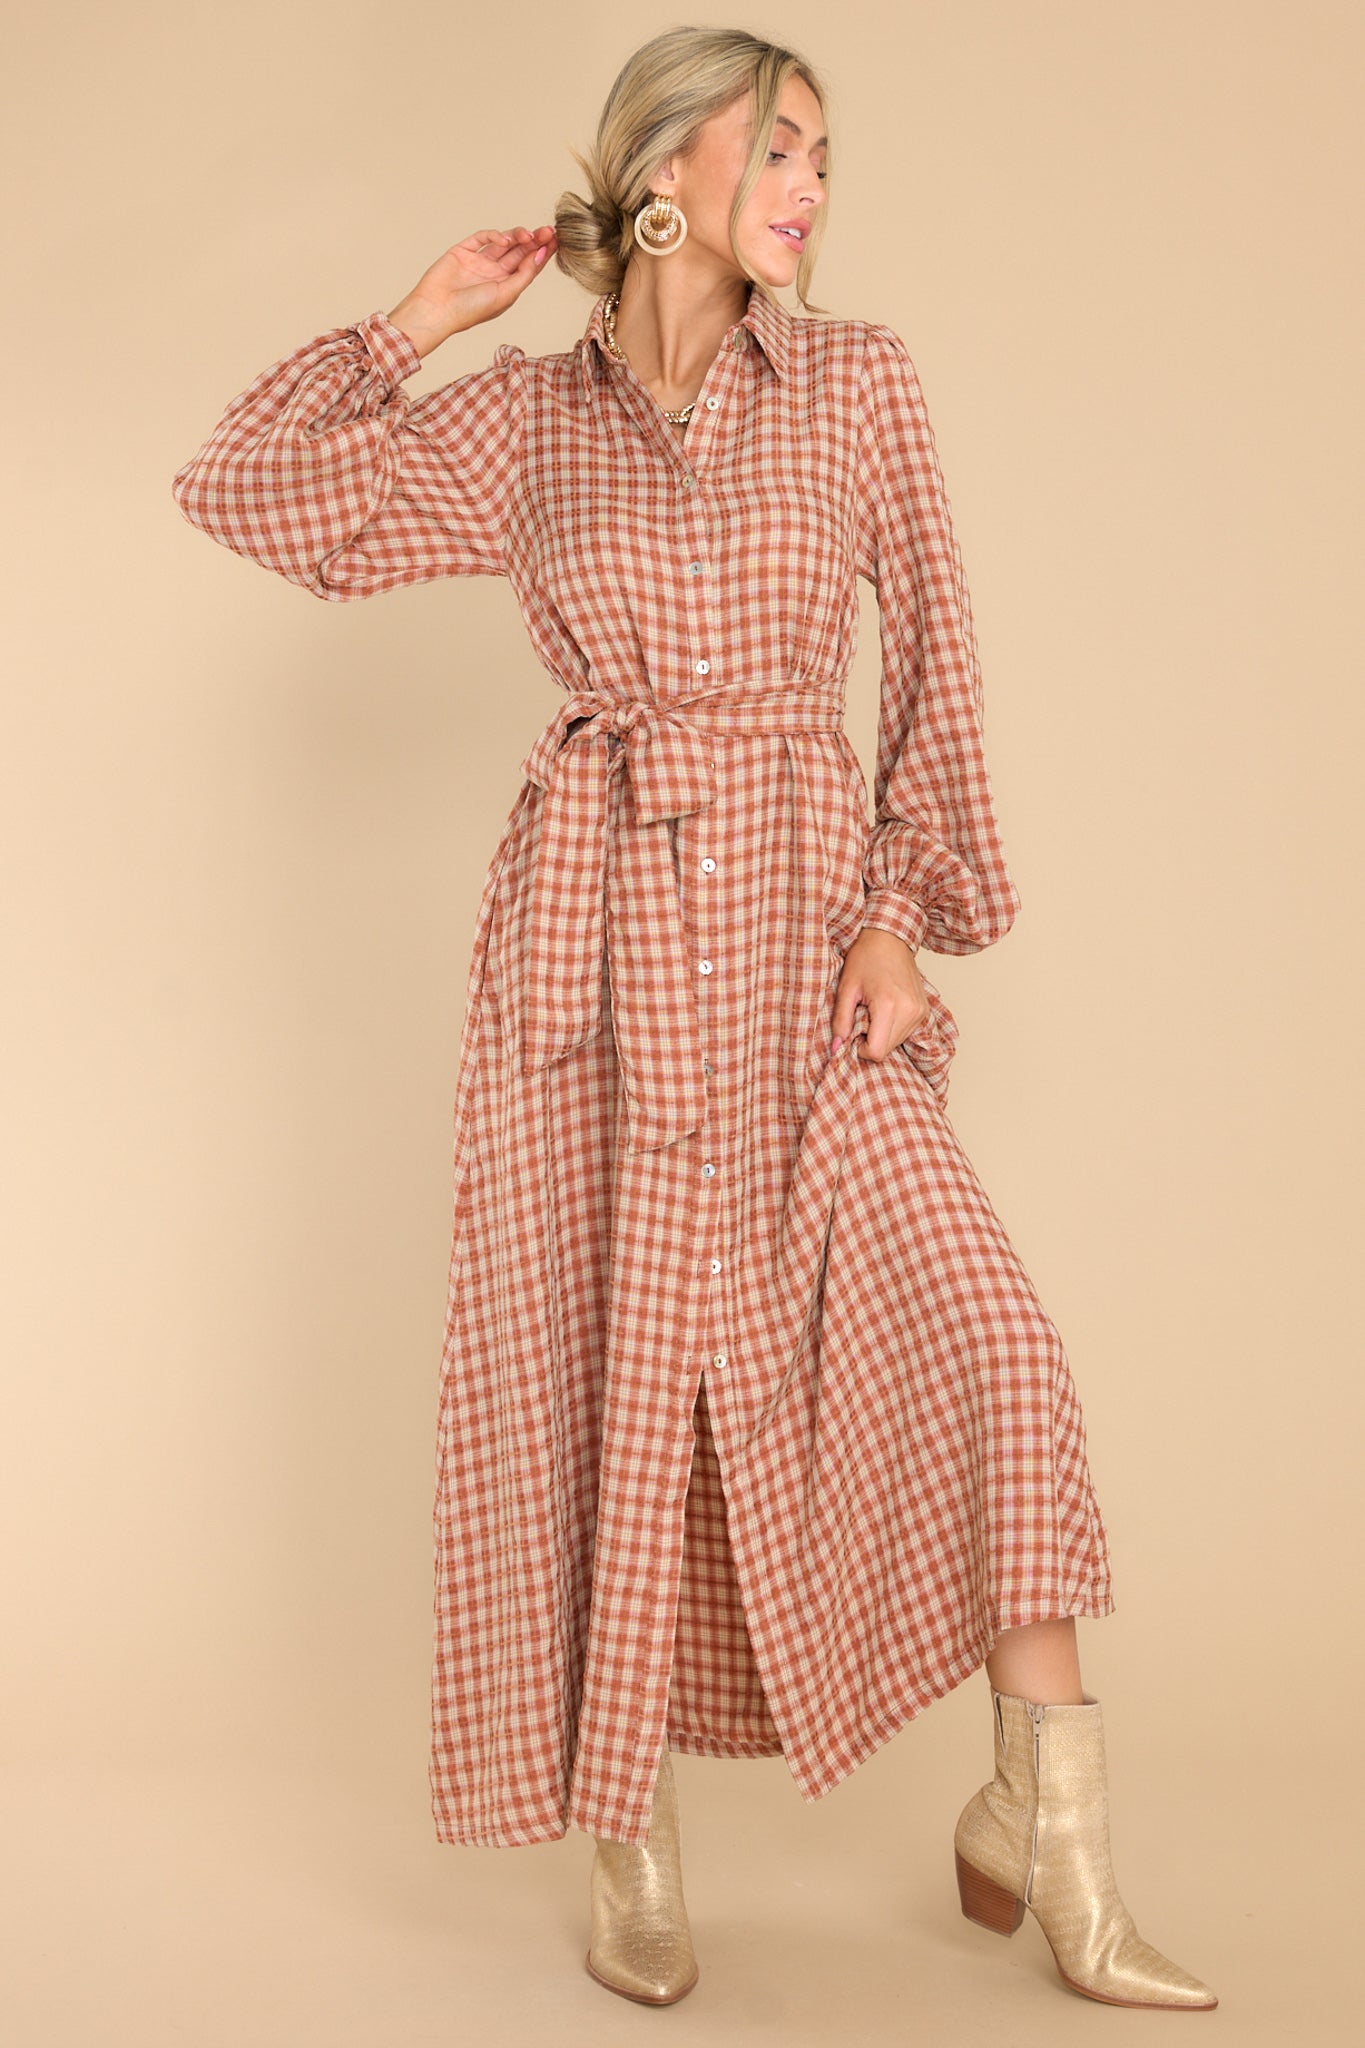 This brown dress features a collared neckline, functional buttons down the front, long sleeves with buttoned cuffs, two functional pockets, and adjustable self-tie belt.